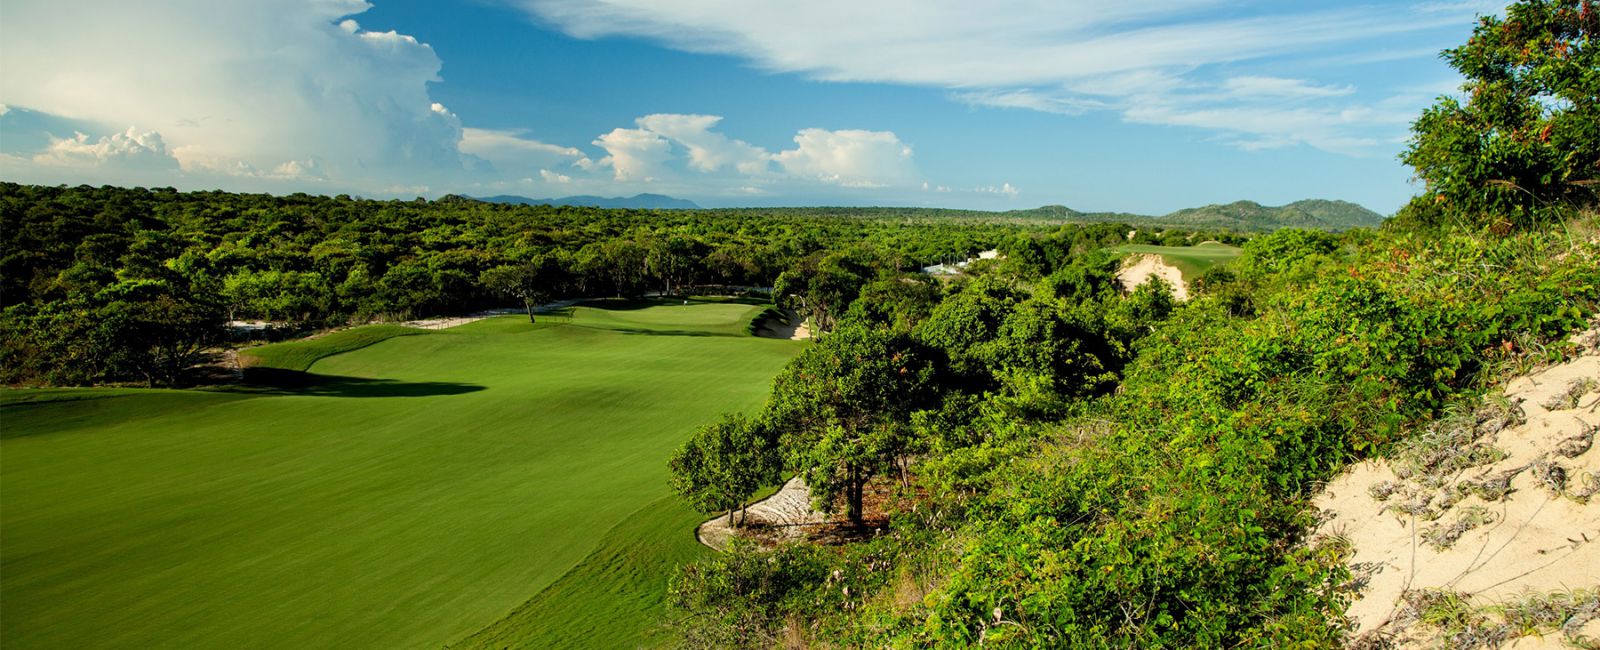 Ho Tram The Bluffs Golf Package 3 Days 2 Nights and 2 Rounds